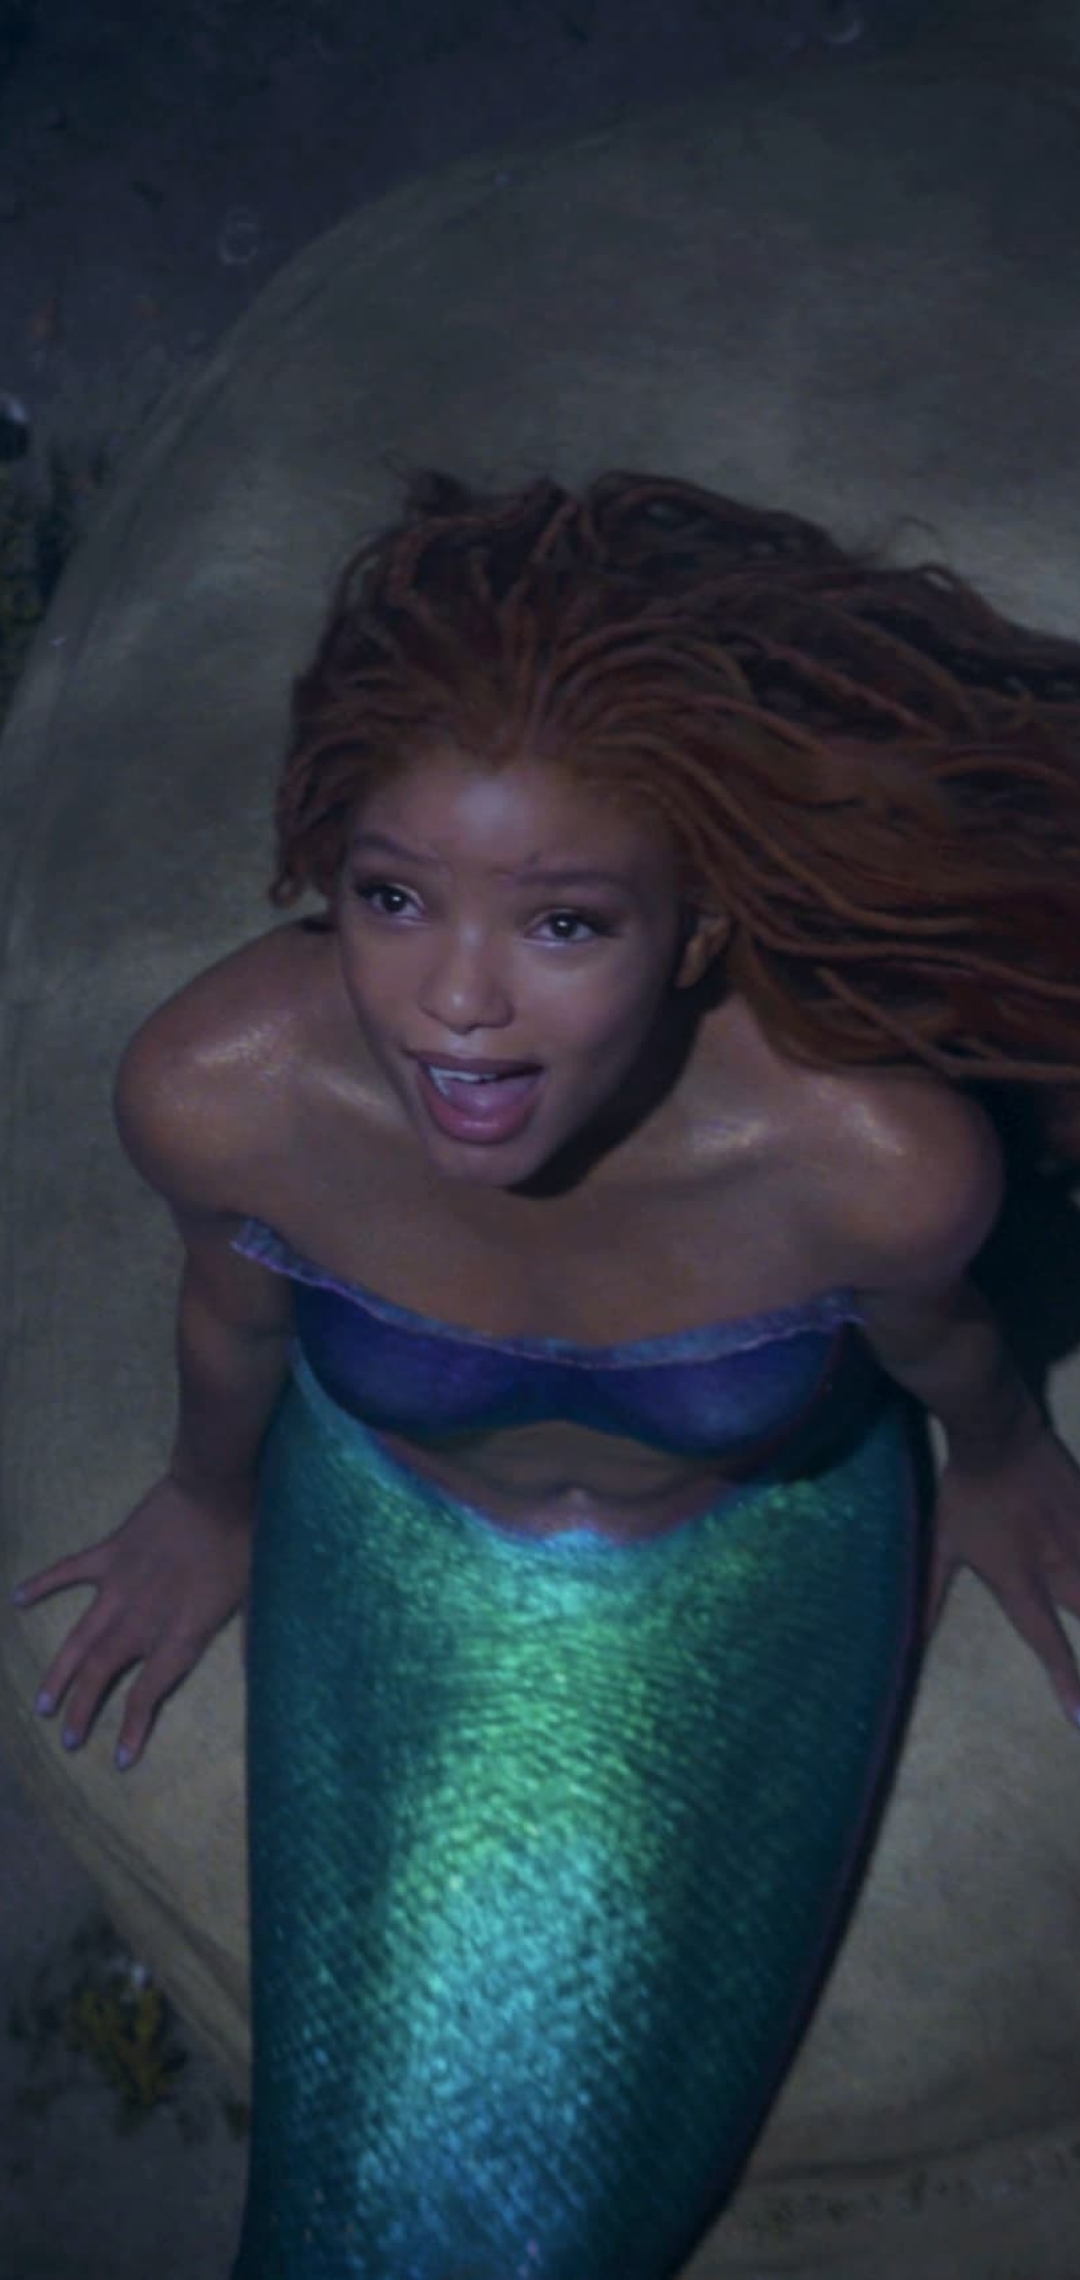 1080x2280 The Little Mermaid 2023 Halle Bailey One Plus 6 Huawei P20 Honor View 10 Vivo Y85 Oppo